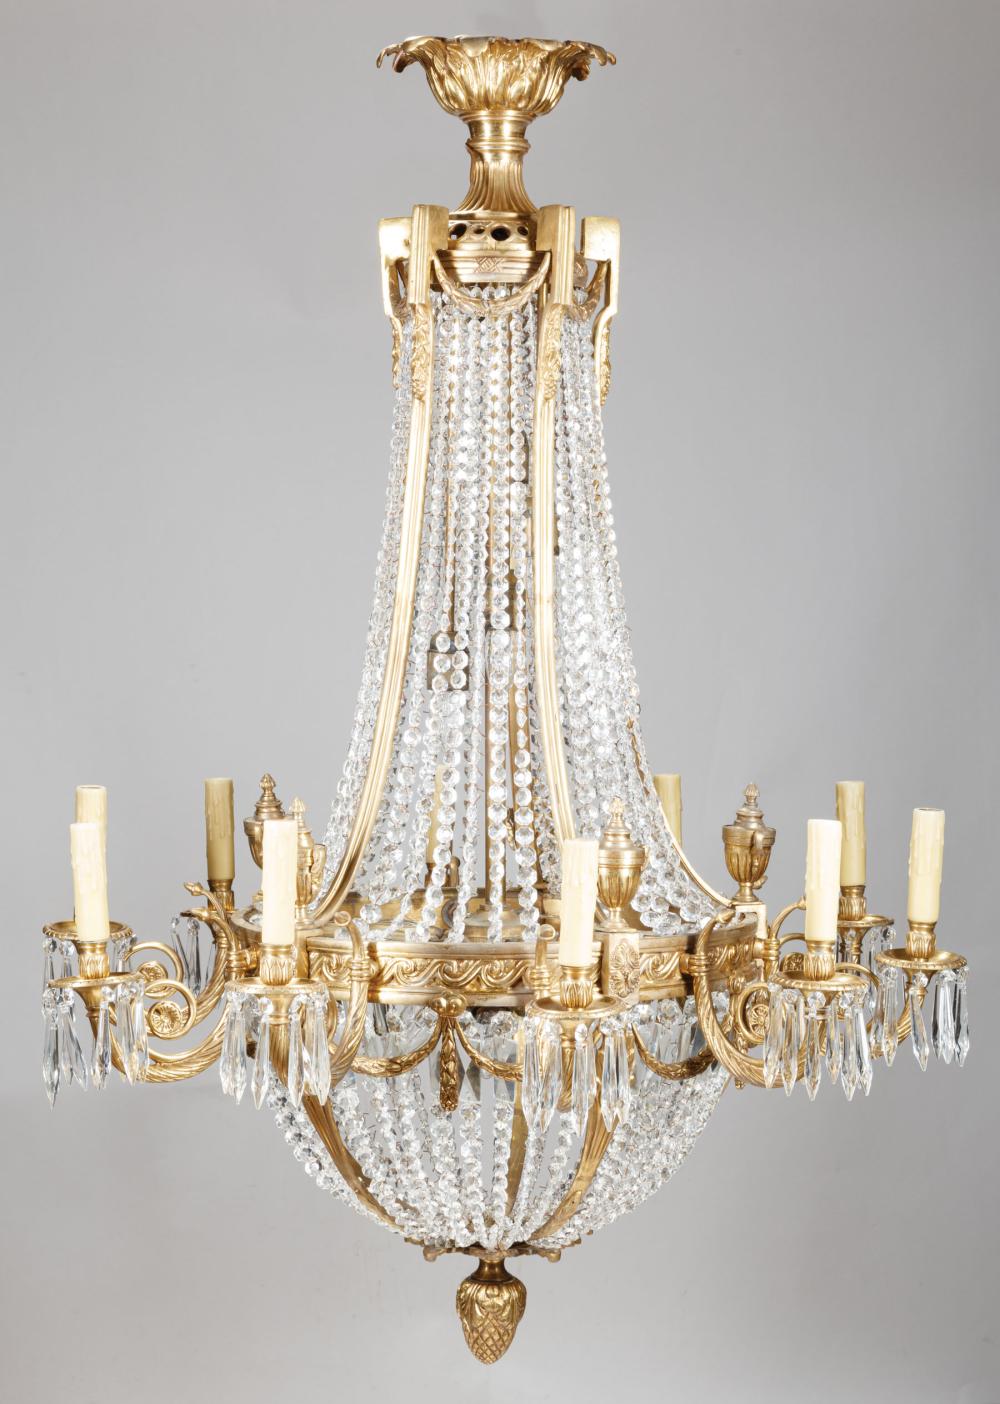 BRONZE AND CUT CRYSTAL CHANDELIERNeoclassical Style 3193d7